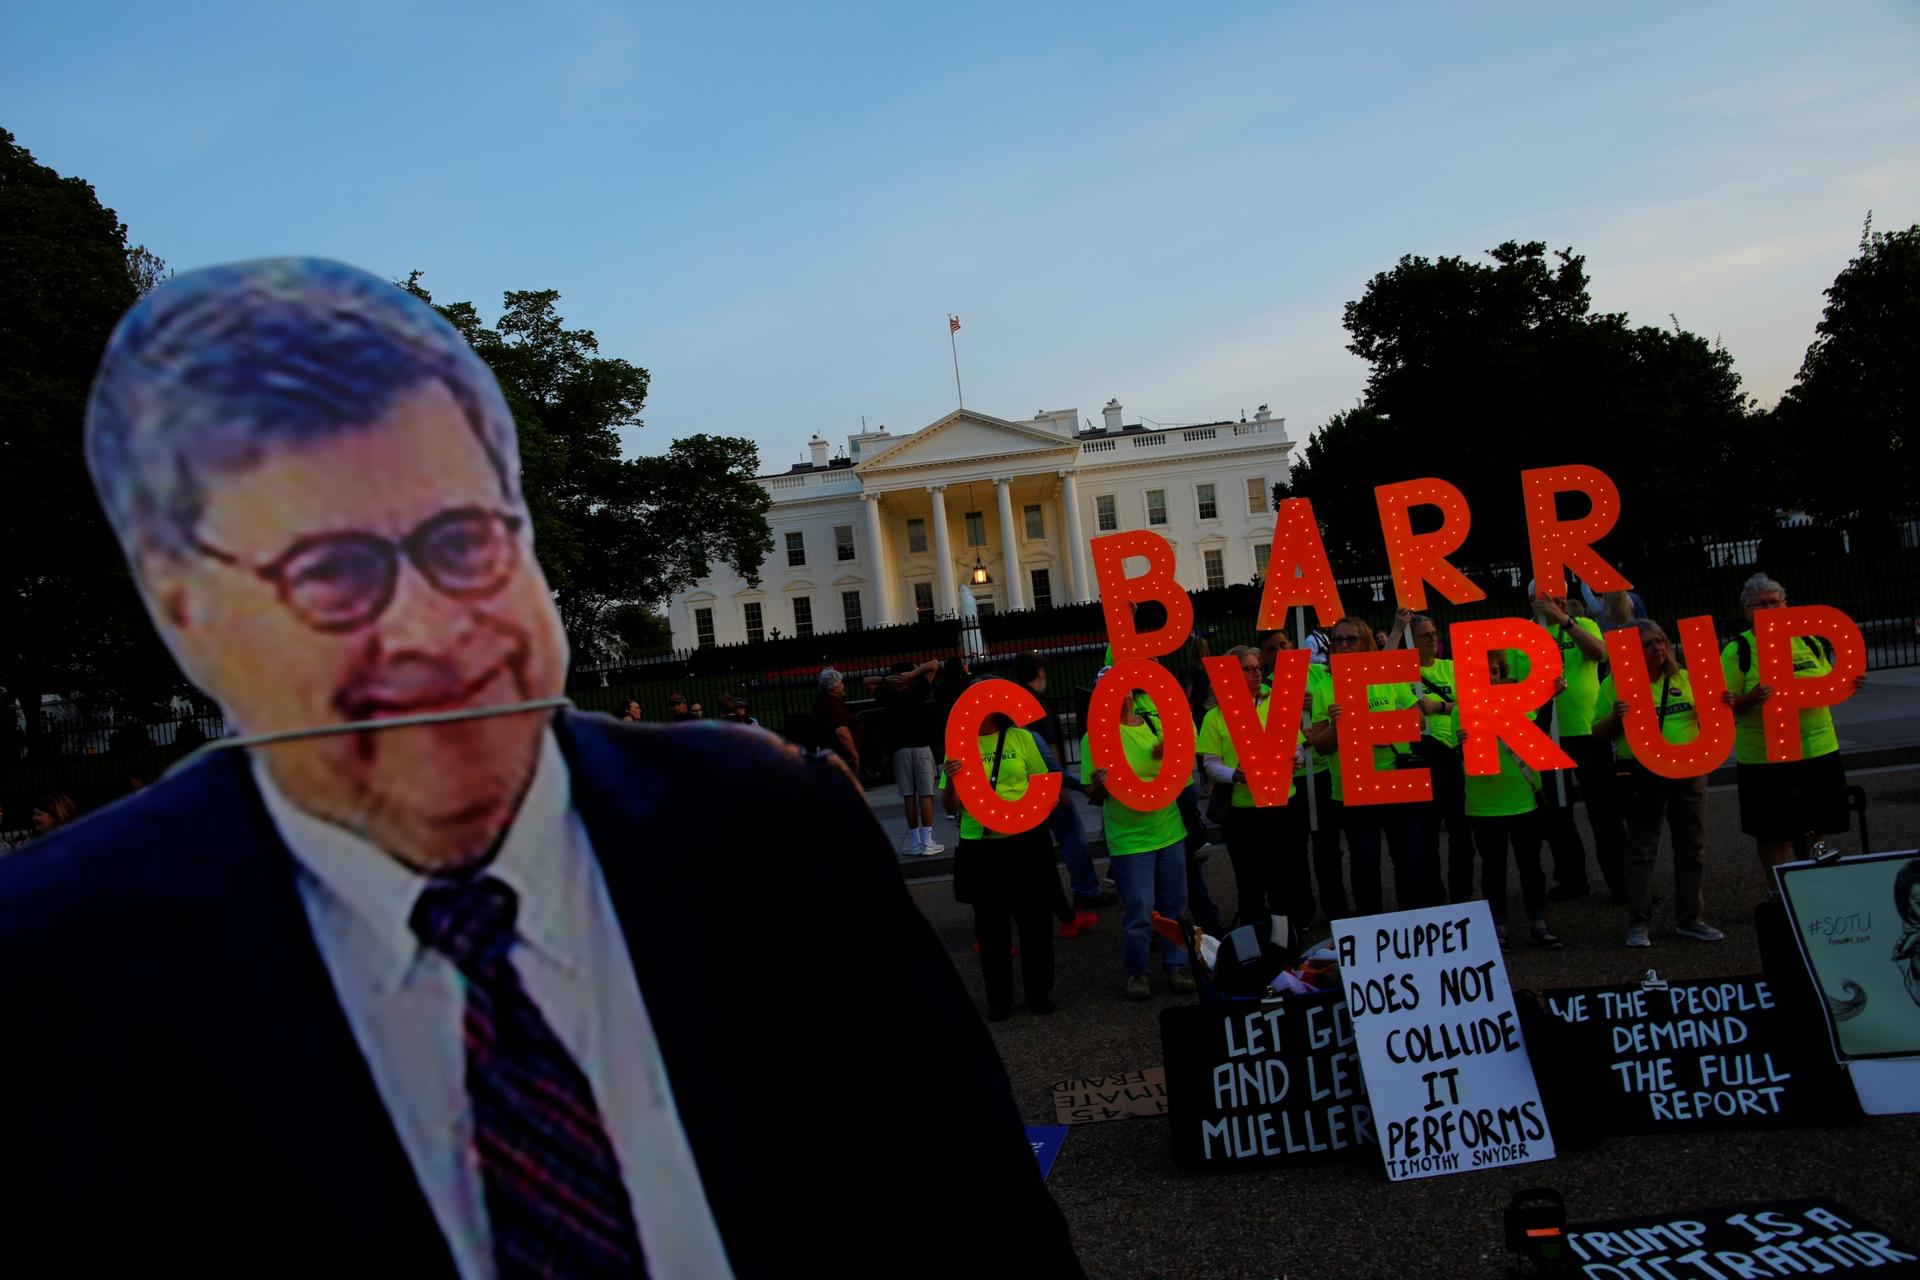 A cardboard cutout of US Attorney General William Barr is seen as protesters hold signs which read "Barr Coverup," following the release of the Mueller report on President Donald Trump at the White House in Washington, DC, April 18, 2019.